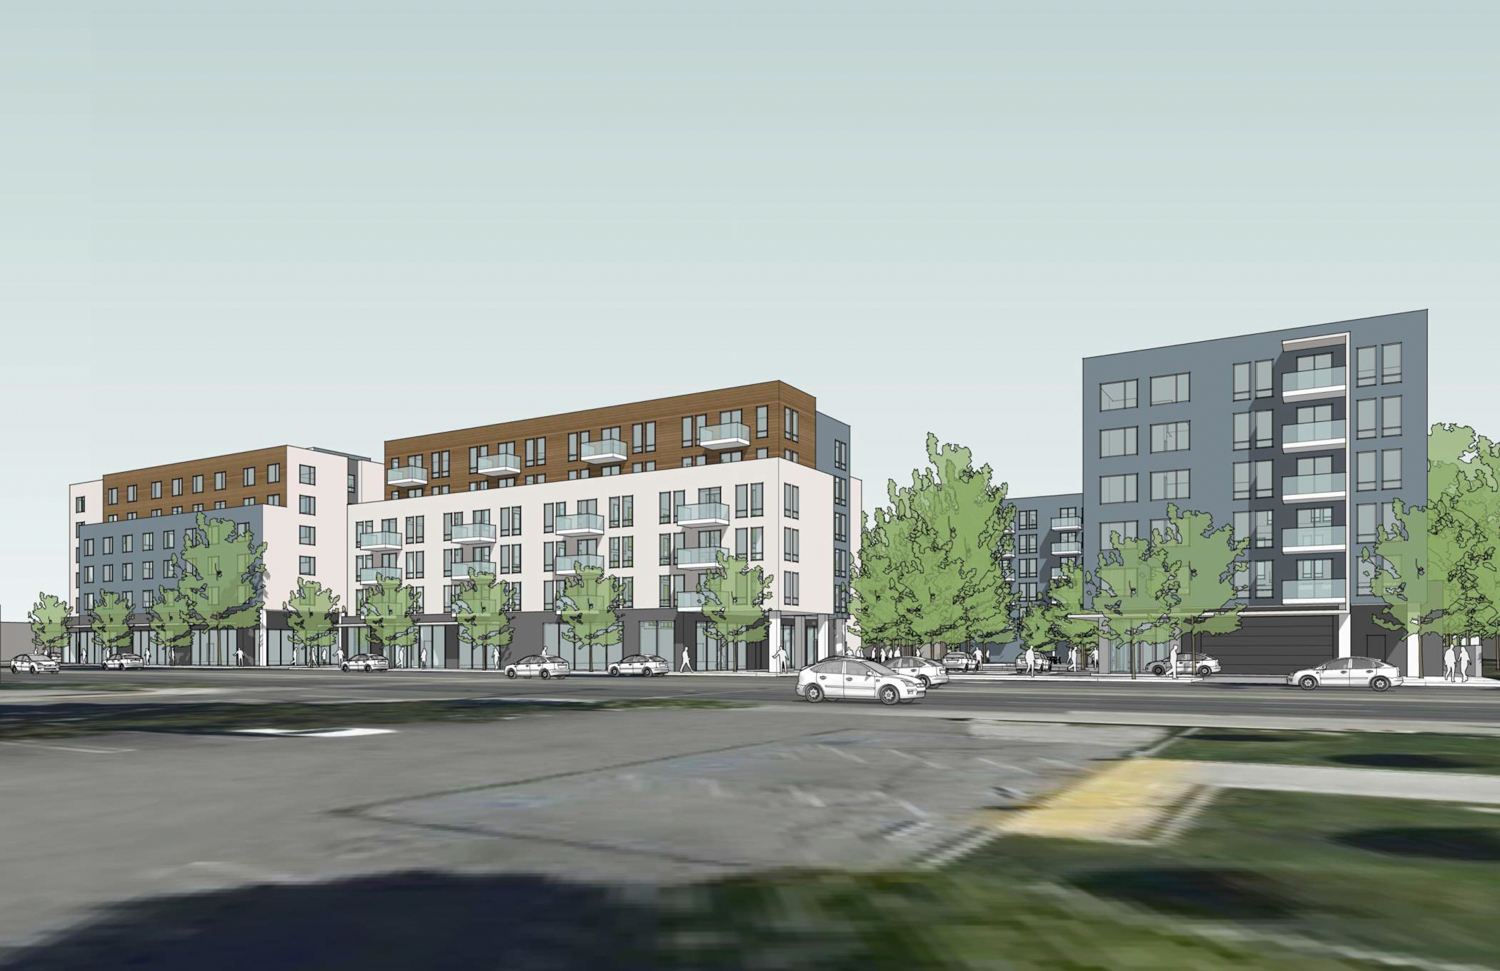 3400 El Camino Real seen from across the main thoroughfare, rendering by Lowney Architecture